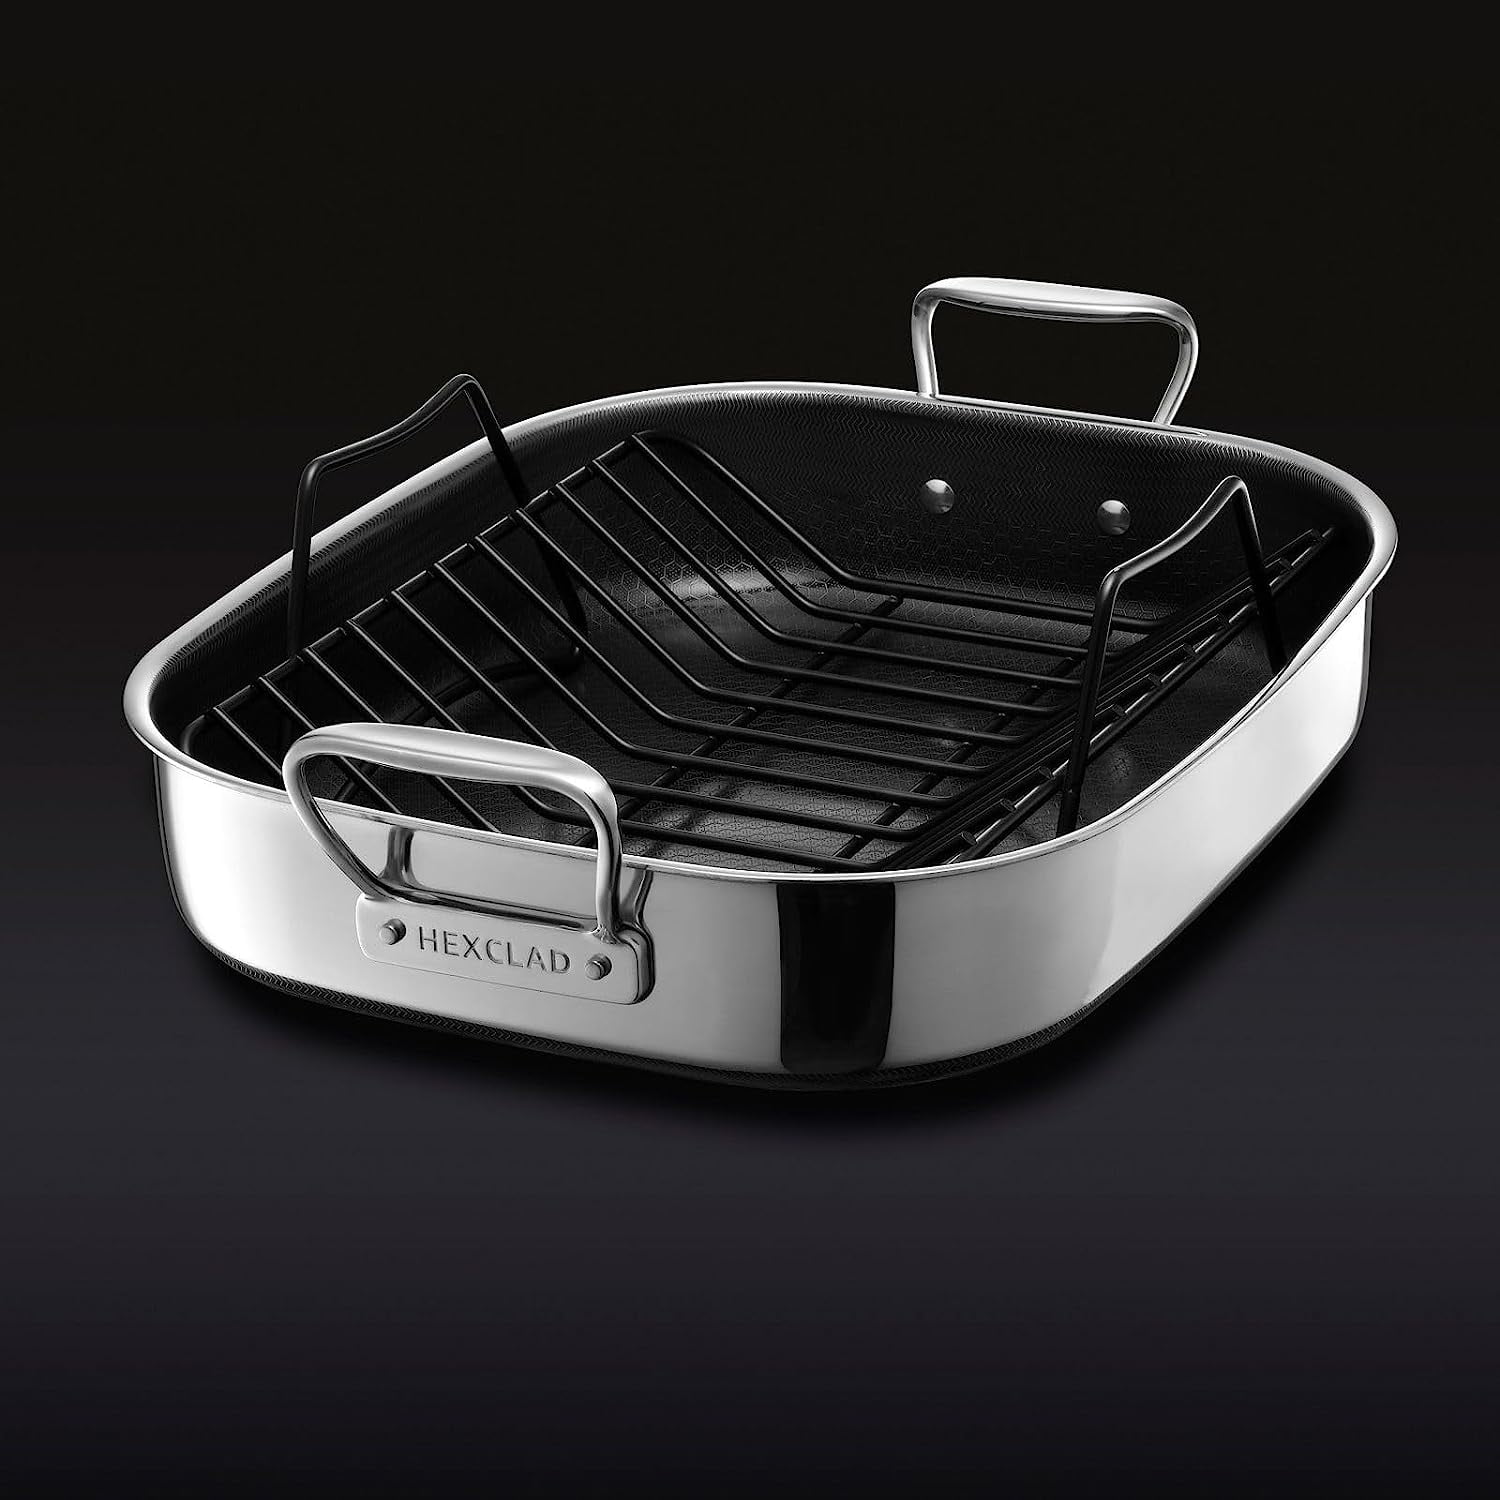 HexClad Hybrid Roasting Pan - Silver - 63 requests